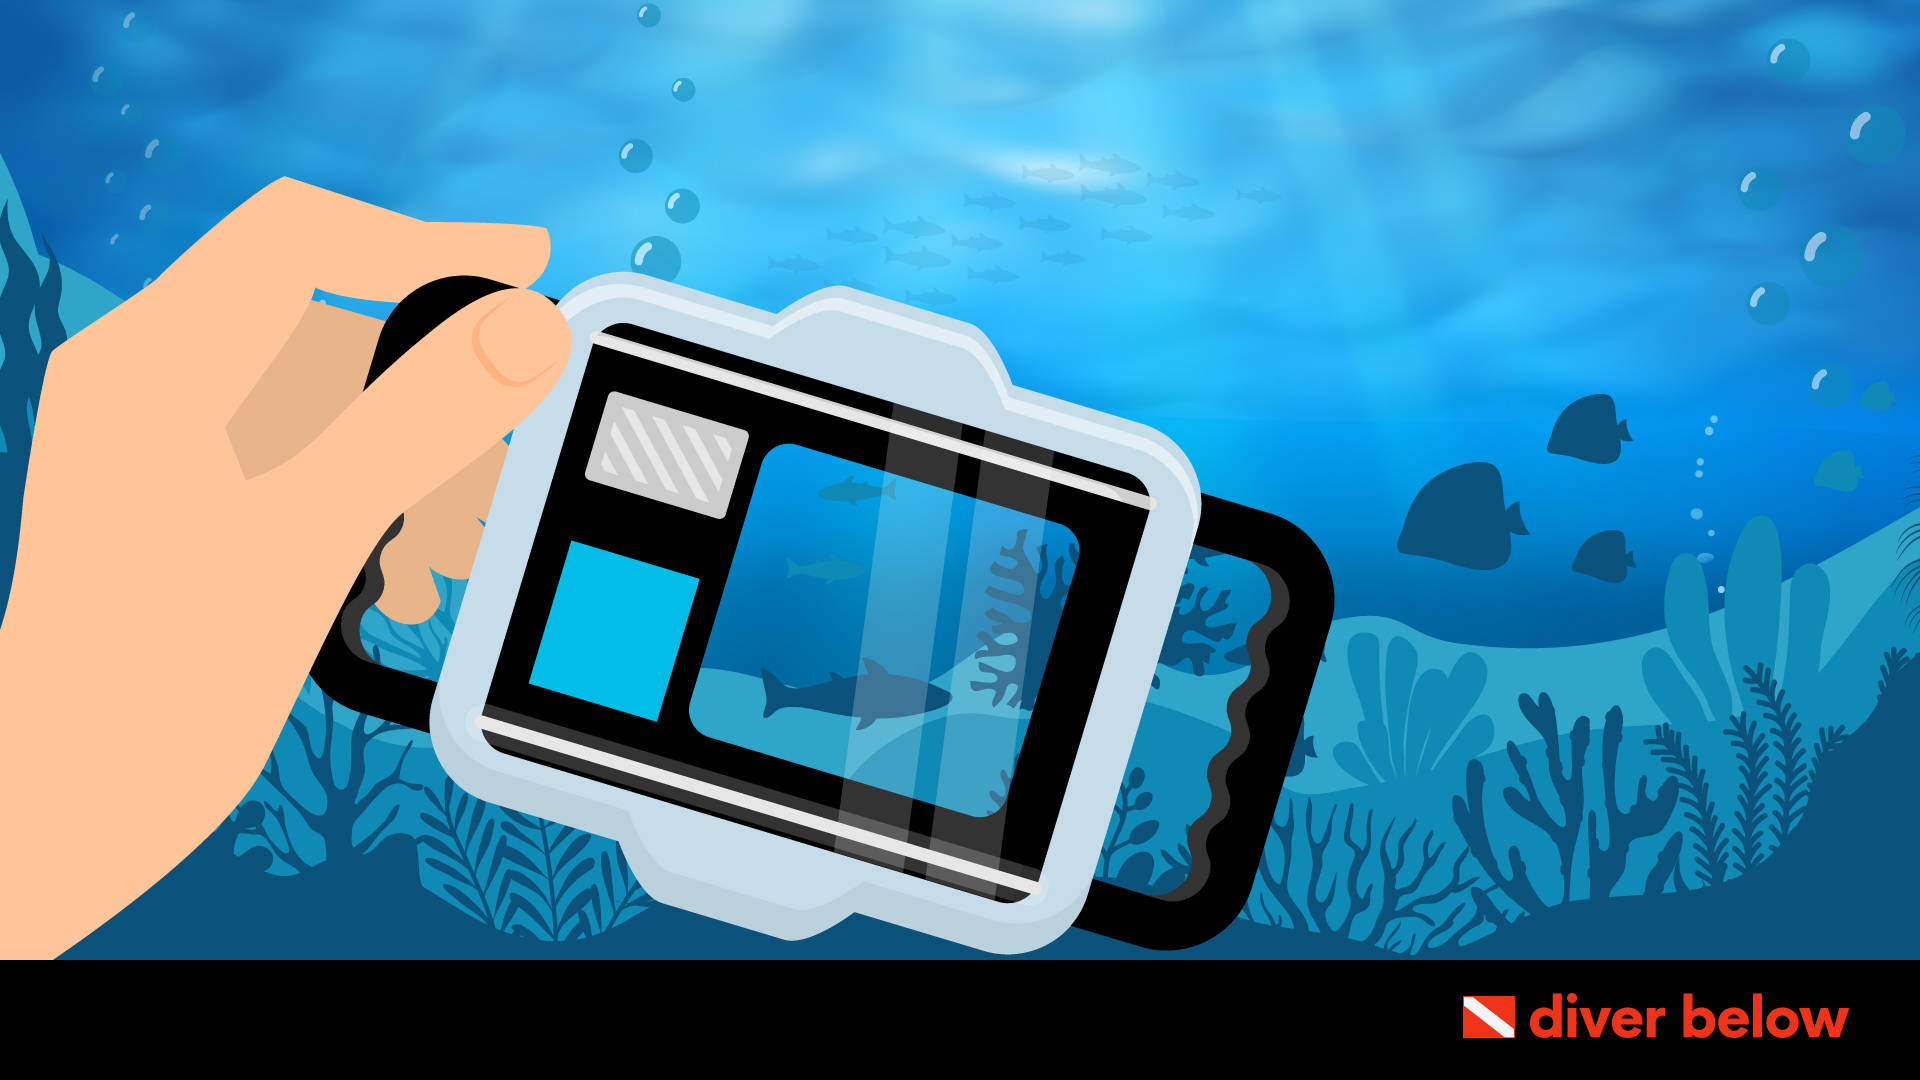 vector graphic showing a hand holding one of the best underwater cameras on the market